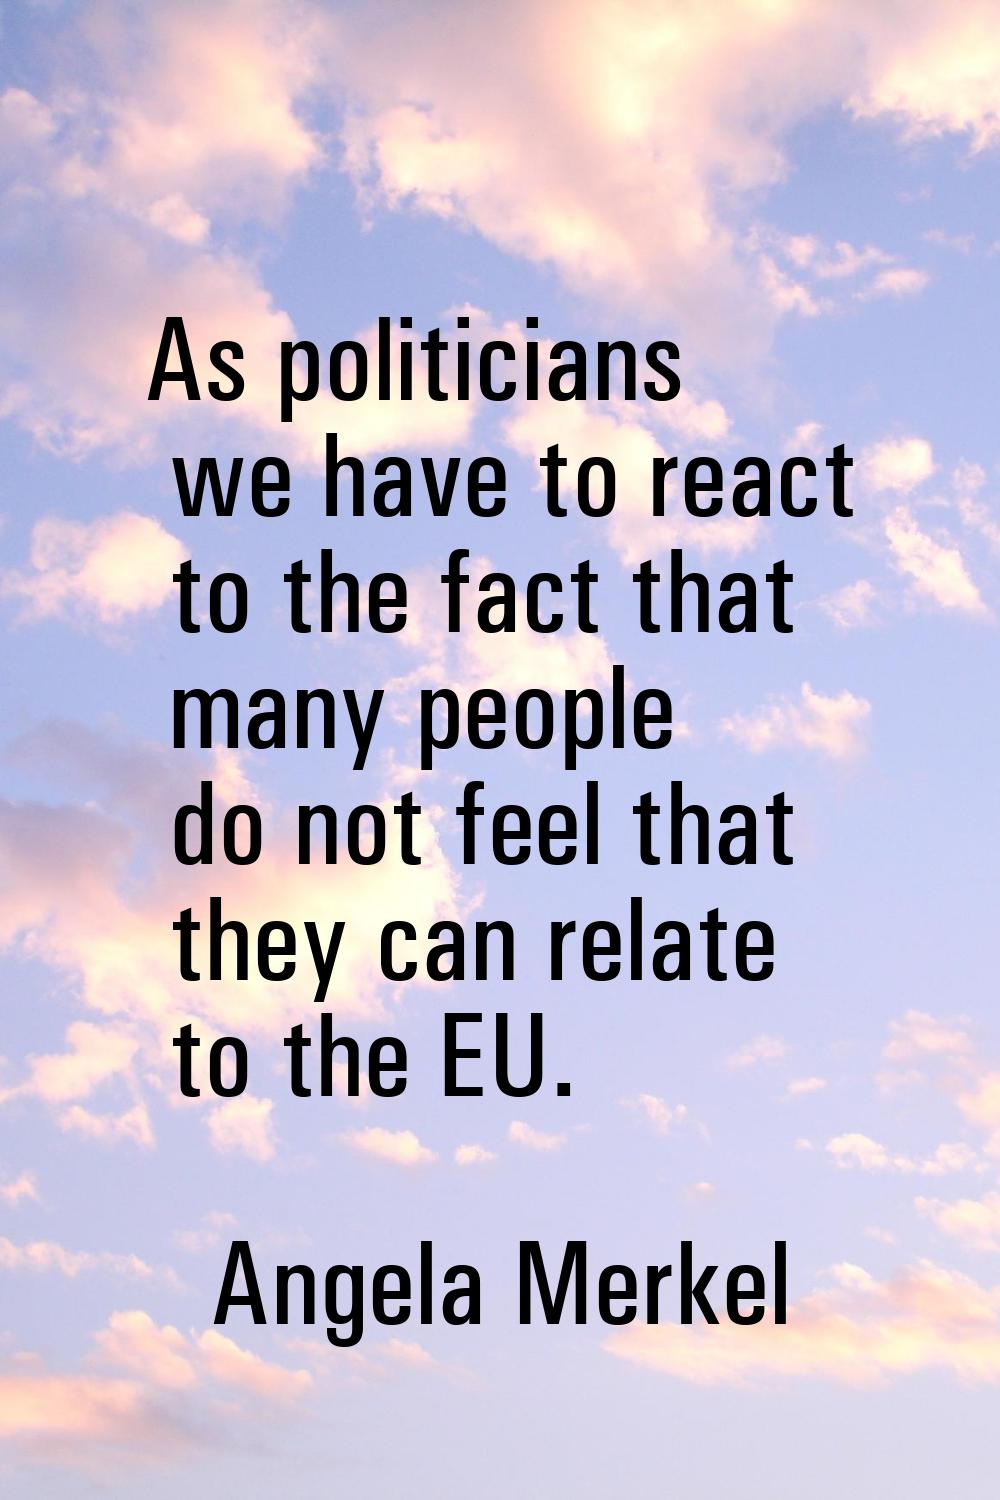 As politicians we have to react to the fact that many people do not feel that they can relate to th